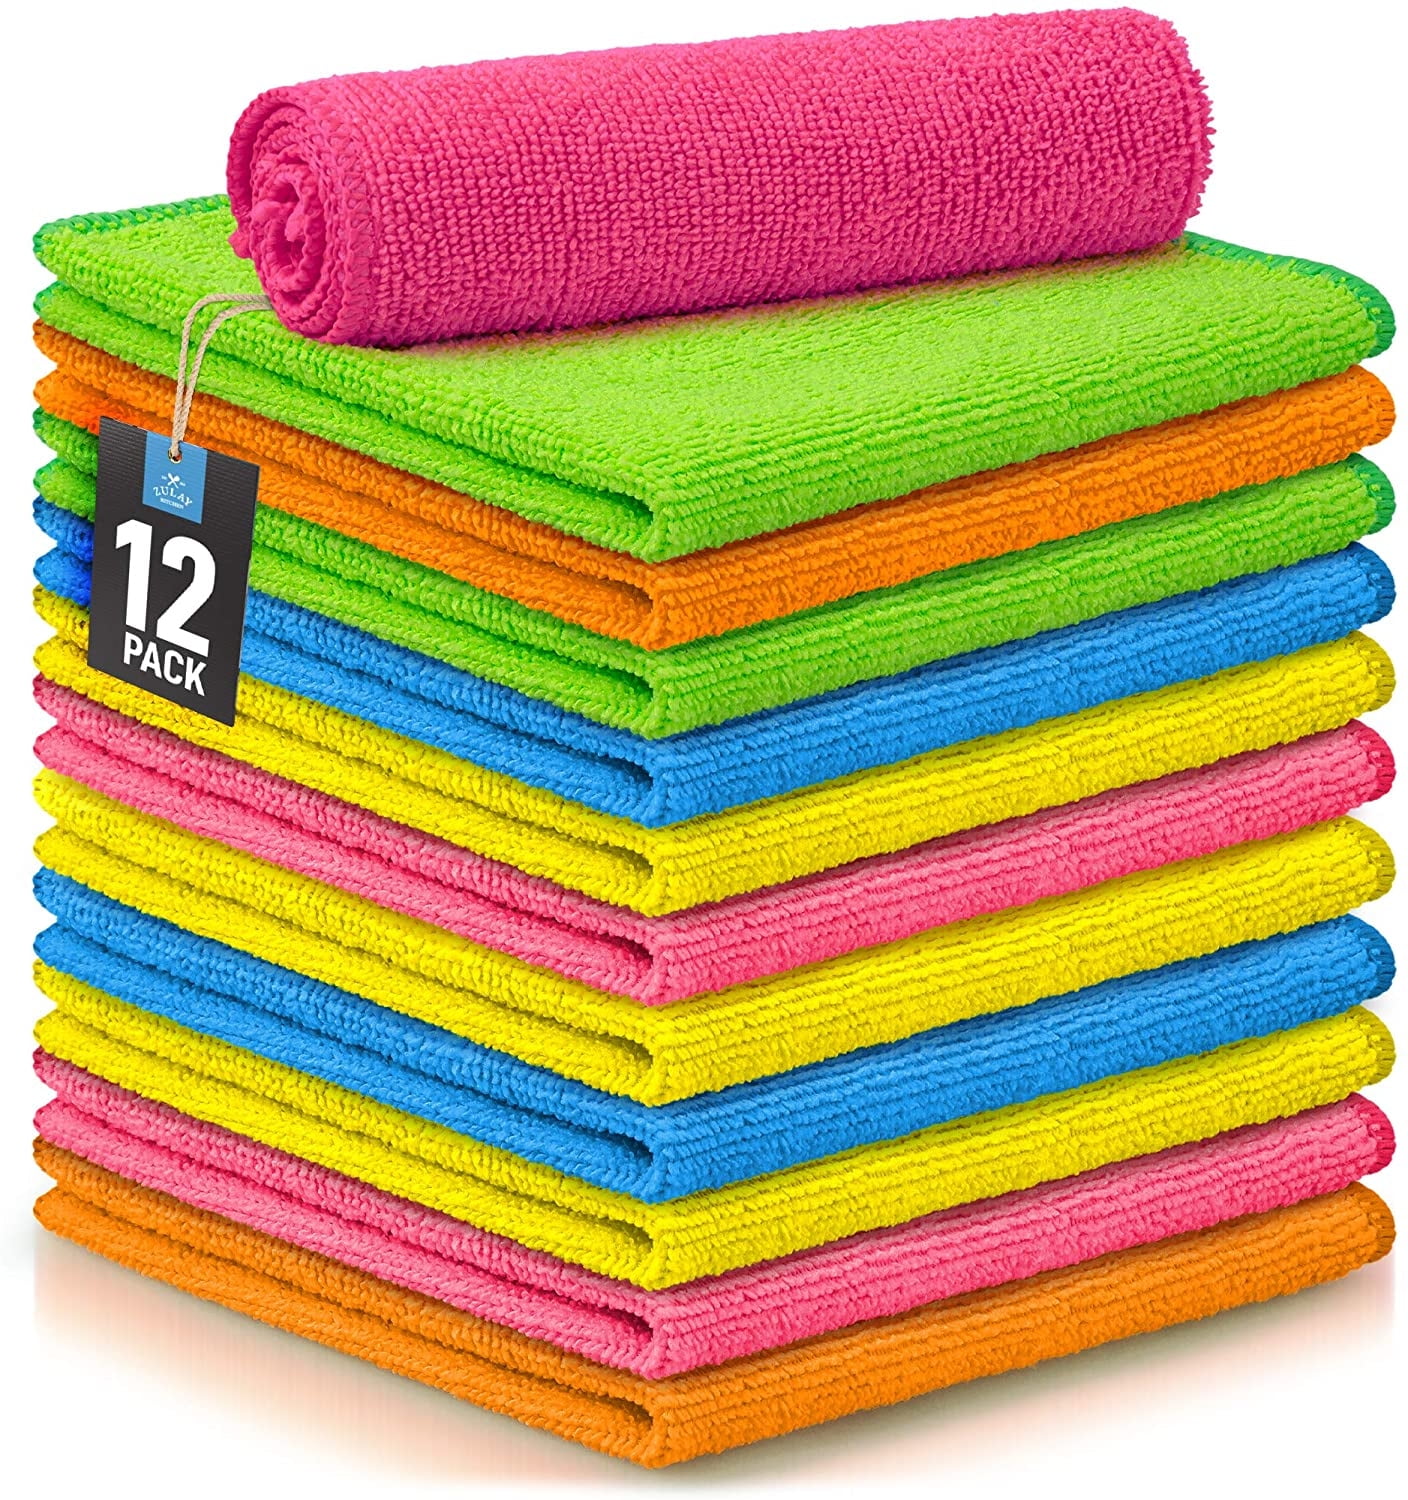 EigPluy Microfiber Cleaning Cloth,12 Pack Dish Cloths,10x10 Inches Dish  Towels,Super Soft and Absorbent Kitchen Dishcloths,Fast Drying Microfiber